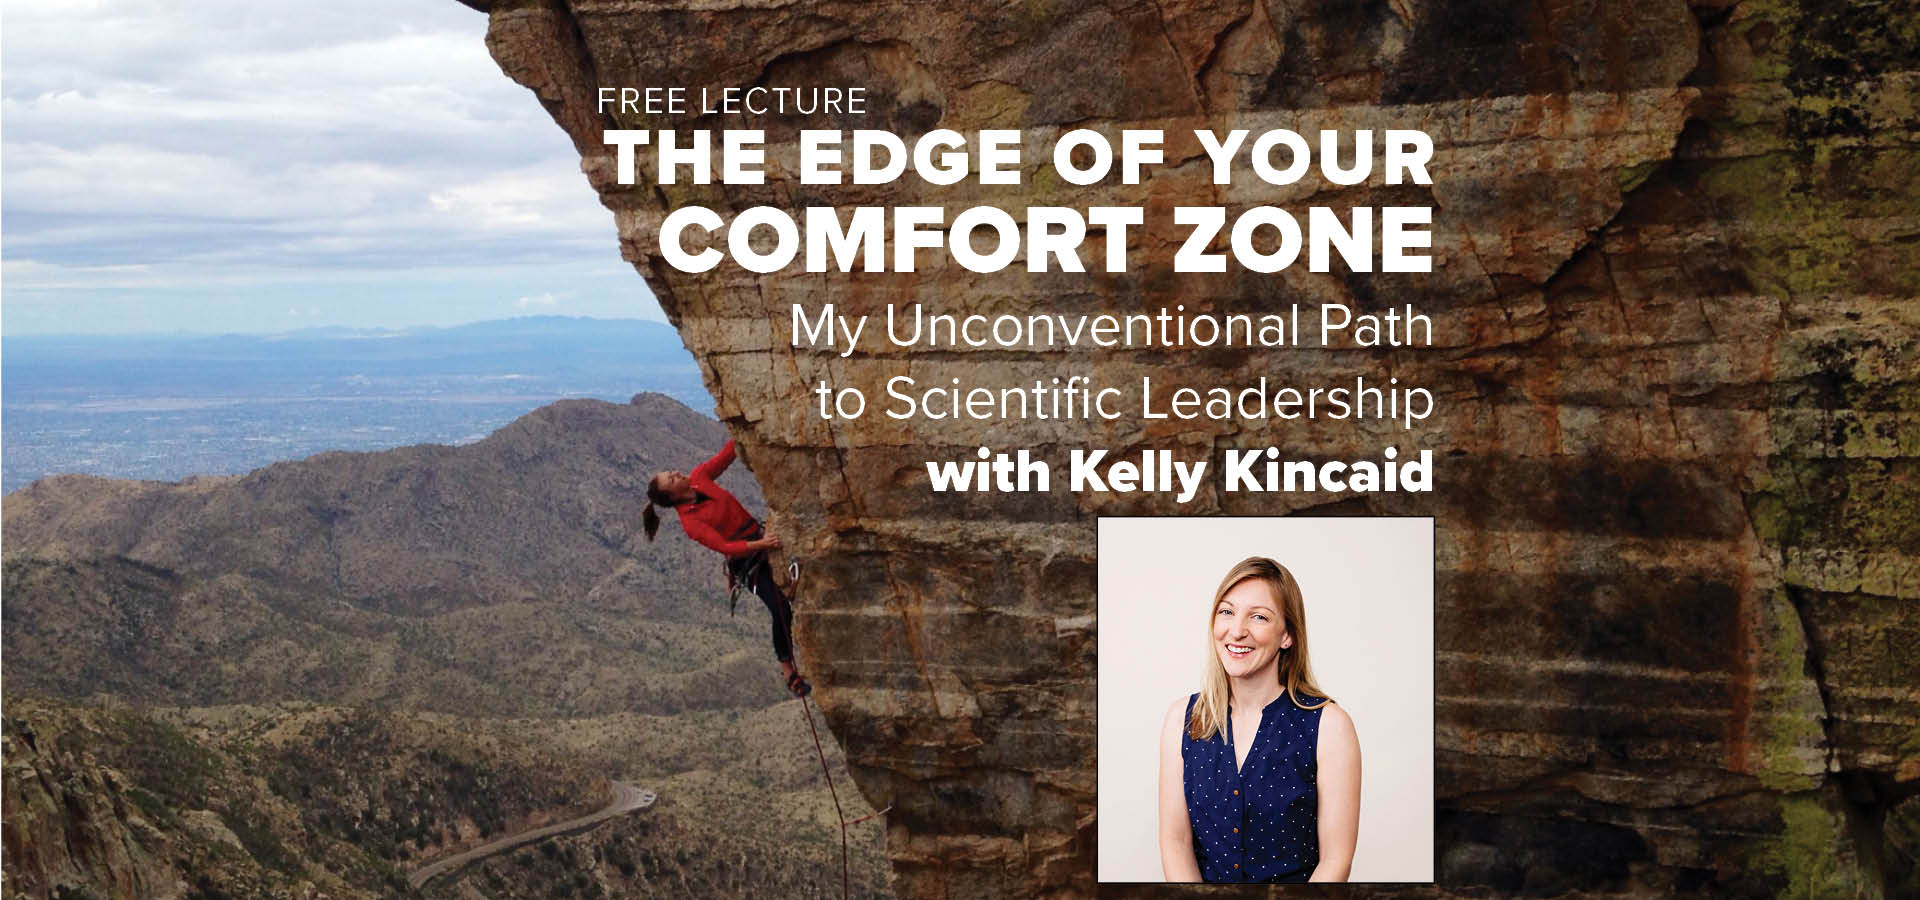 Kelly Kincaid Lecture image of her rock climbing and head shot